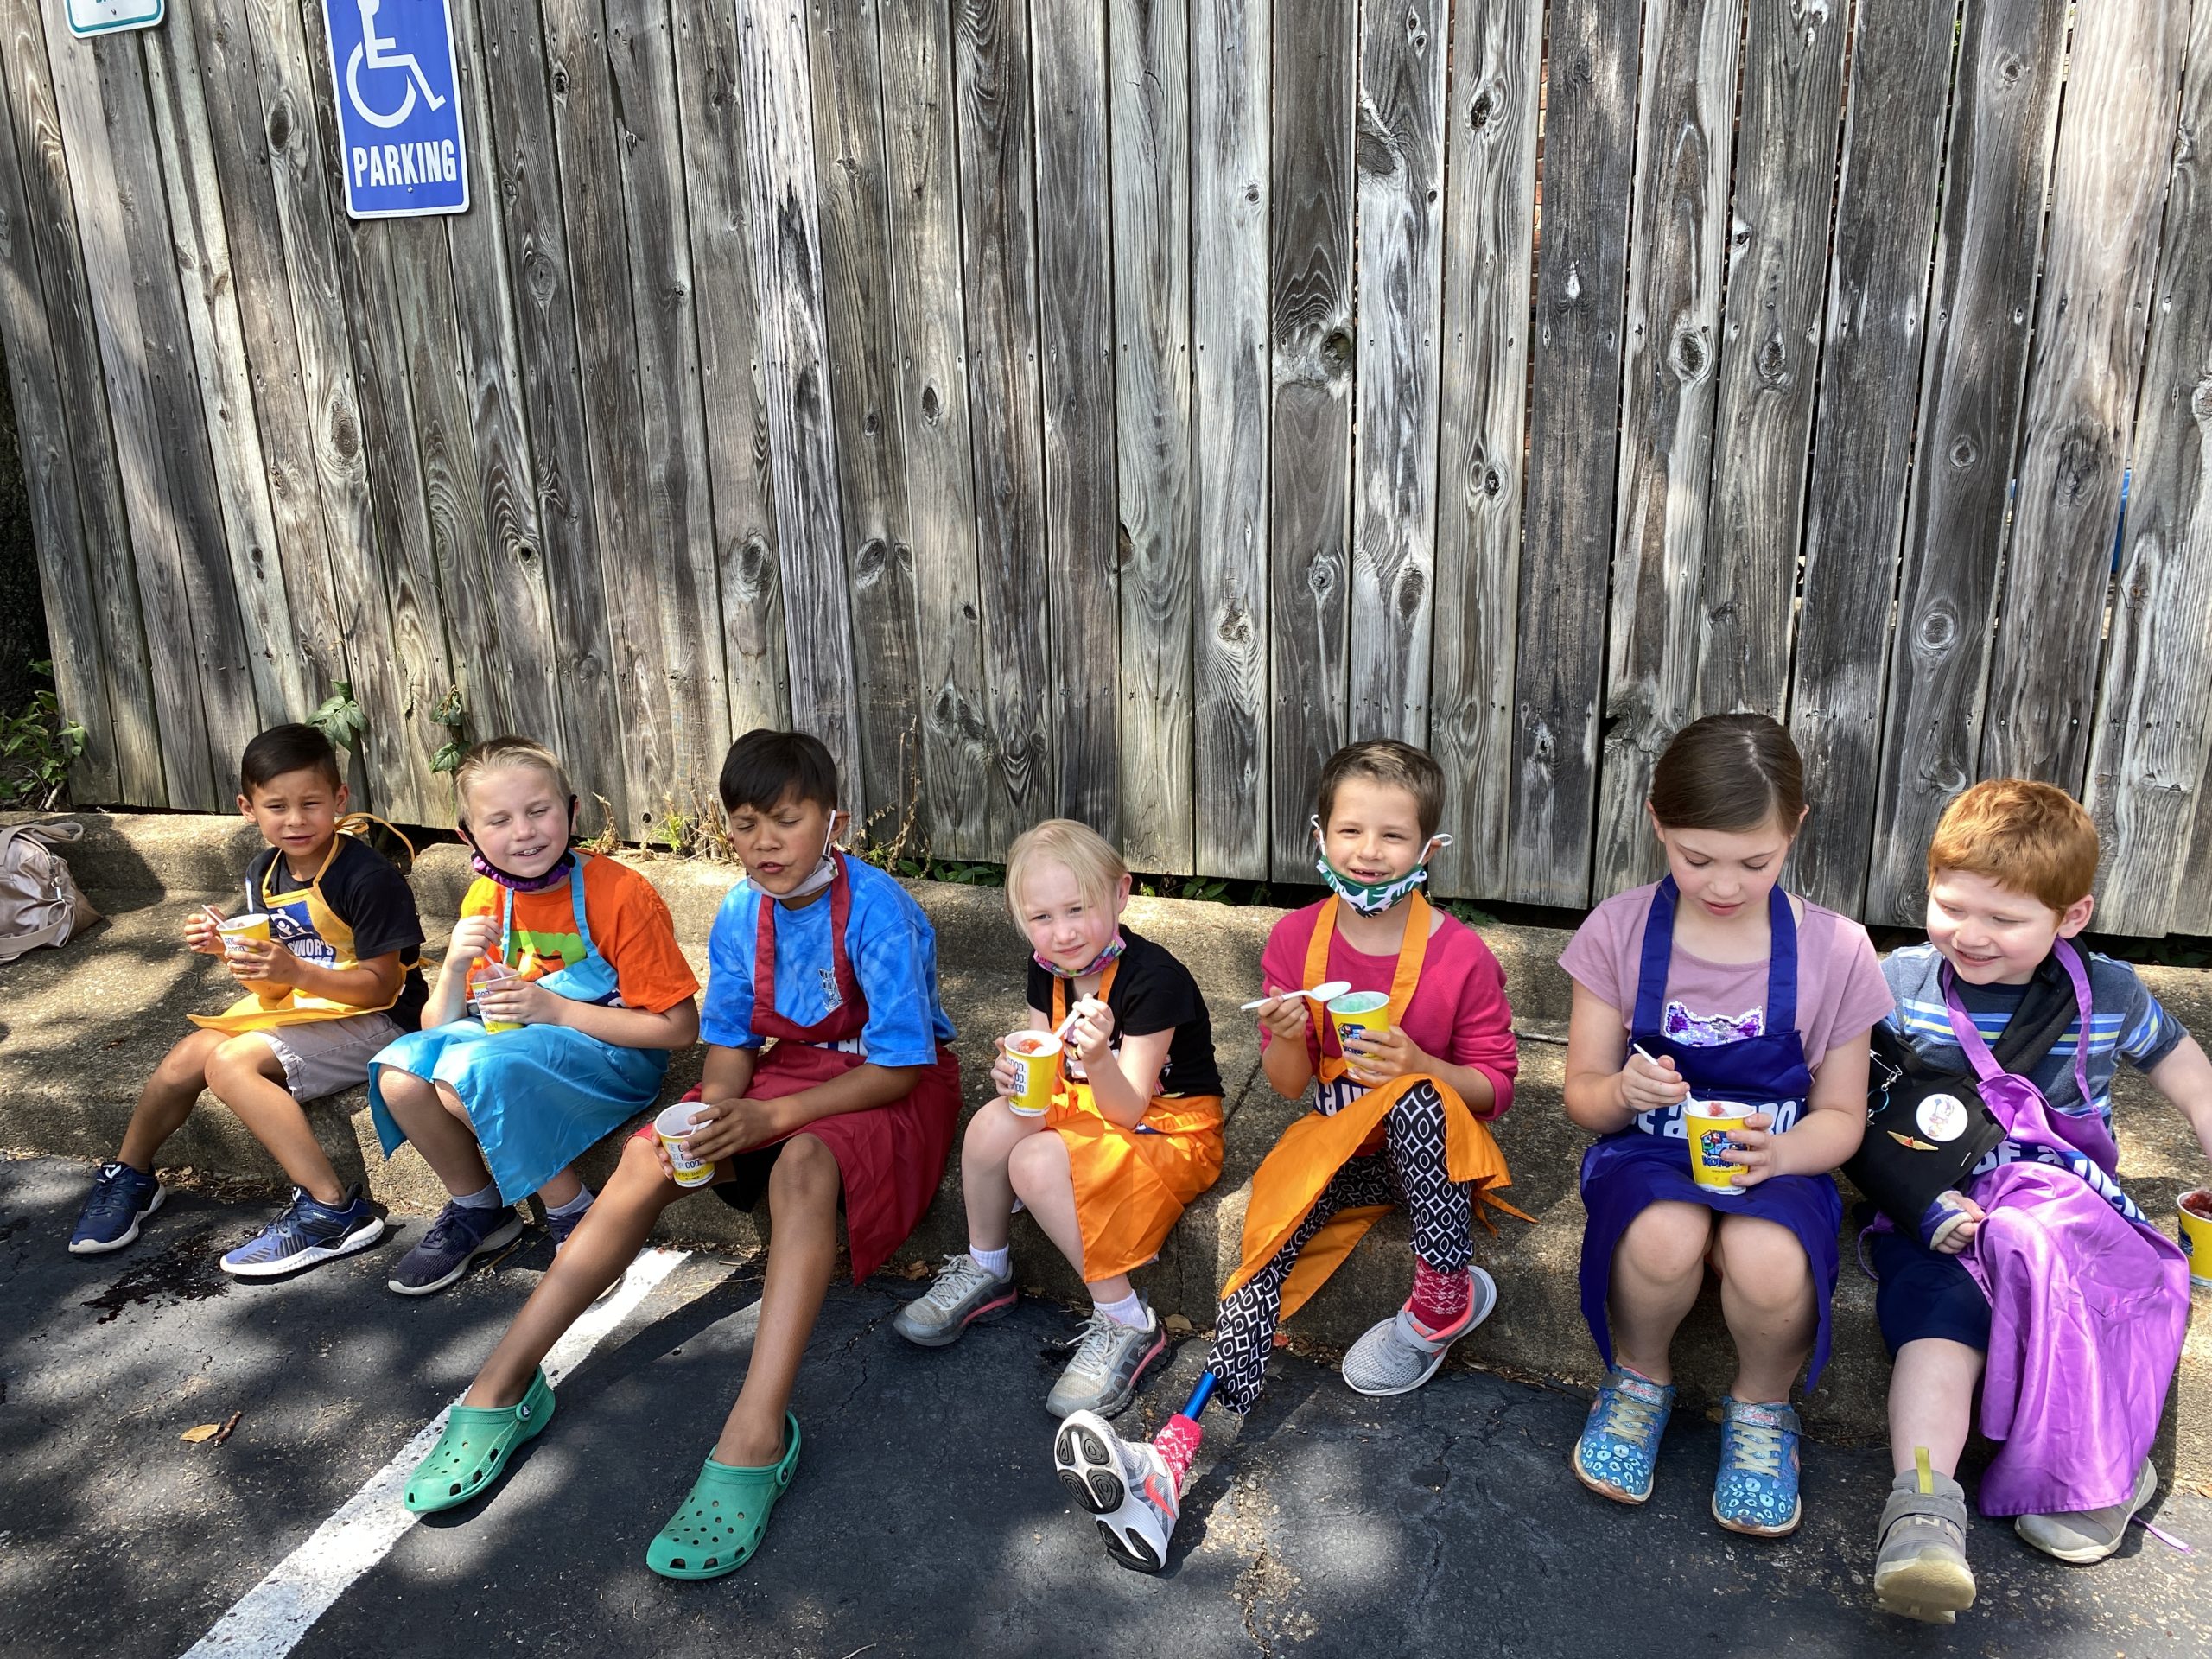 Seven children sitting on a curb eating ice cream